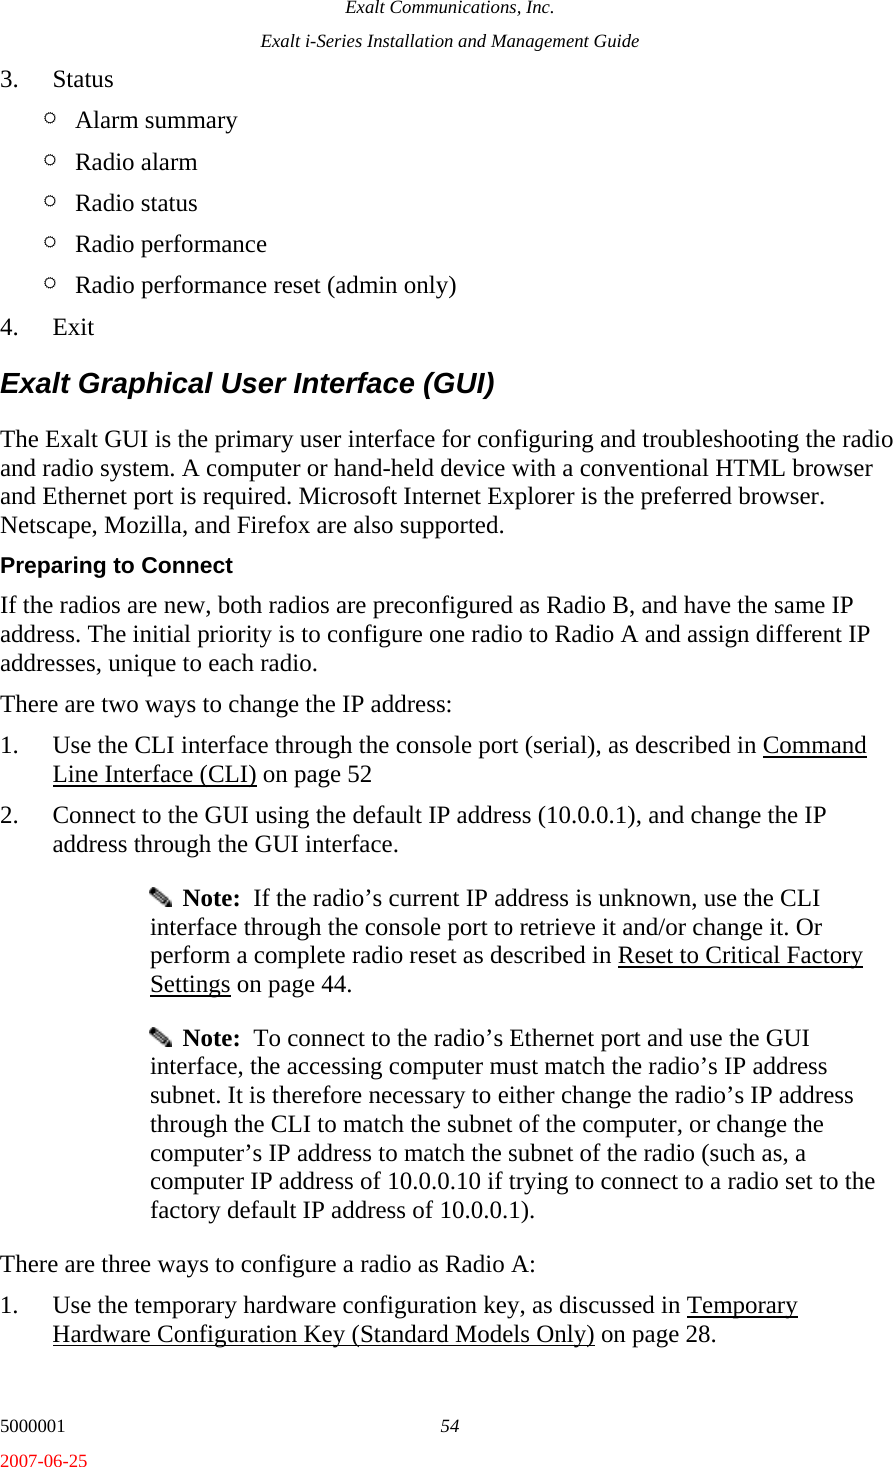 Exalt Communications, Inc. Exalt i-Series Installation and Management Guide 5000001  54 2007-06-25 3. Status ¶ Alarm summary ¶ Radio alarm ¶ Radio status ¶ Radio performance ¶ Radio performance reset (admin only) 4. Exit Exalt Graphical User Interface (GUI) The Exalt GUI is the primary user interface for configuring and troubleshooting the radio and radio system. A computer or hand-held device with a conventional HTML browser and Ethernet port is required. Microsoft Internet Explorer is the preferred browser. Netscape, Mozilla, and Firefox are also supported. Preparing to Connect If the radios are new, both radios are preconfigured as Radio B, and have the same IP address. The initial priority is to configure one radio to Radio A and assign different IP addresses, unique to each radio.  There are two ways to change the IP address: 1. Use the CLI interface through the console port (serial), as described in Command Line Interface (CLI) on page 52 2. Connect to the GUI using the default IP address (10.0.0.1), and change the IP address through the GUI interface.   Note:  If the radio’s current IP address is unknown, use the CLI interface through the console port to retrieve it and/or change it. Or perform a complete radio reset as described in Reset to Critical Factory Settings on page 44.   Note:  To connect to the radio’s Ethernet port and use the GUI interface, the accessing computer must match the radio’s IP address subnet. It is therefore necessary to either change the radio’s IP address through the CLI to match the subnet of the computer, or change the computer’s IP address to match the subnet of the radio (such as, a computer IP address of 10.0.0.10 if trying to connect to a radio set to the factory default IP address of 10.0.0.1). There are three ways to configure a radio as Radio A: 1. Use the temporary hardware configuration key, as discussed in Temporary Hardware Configuration Key (Standard Models Only) on page 28. 